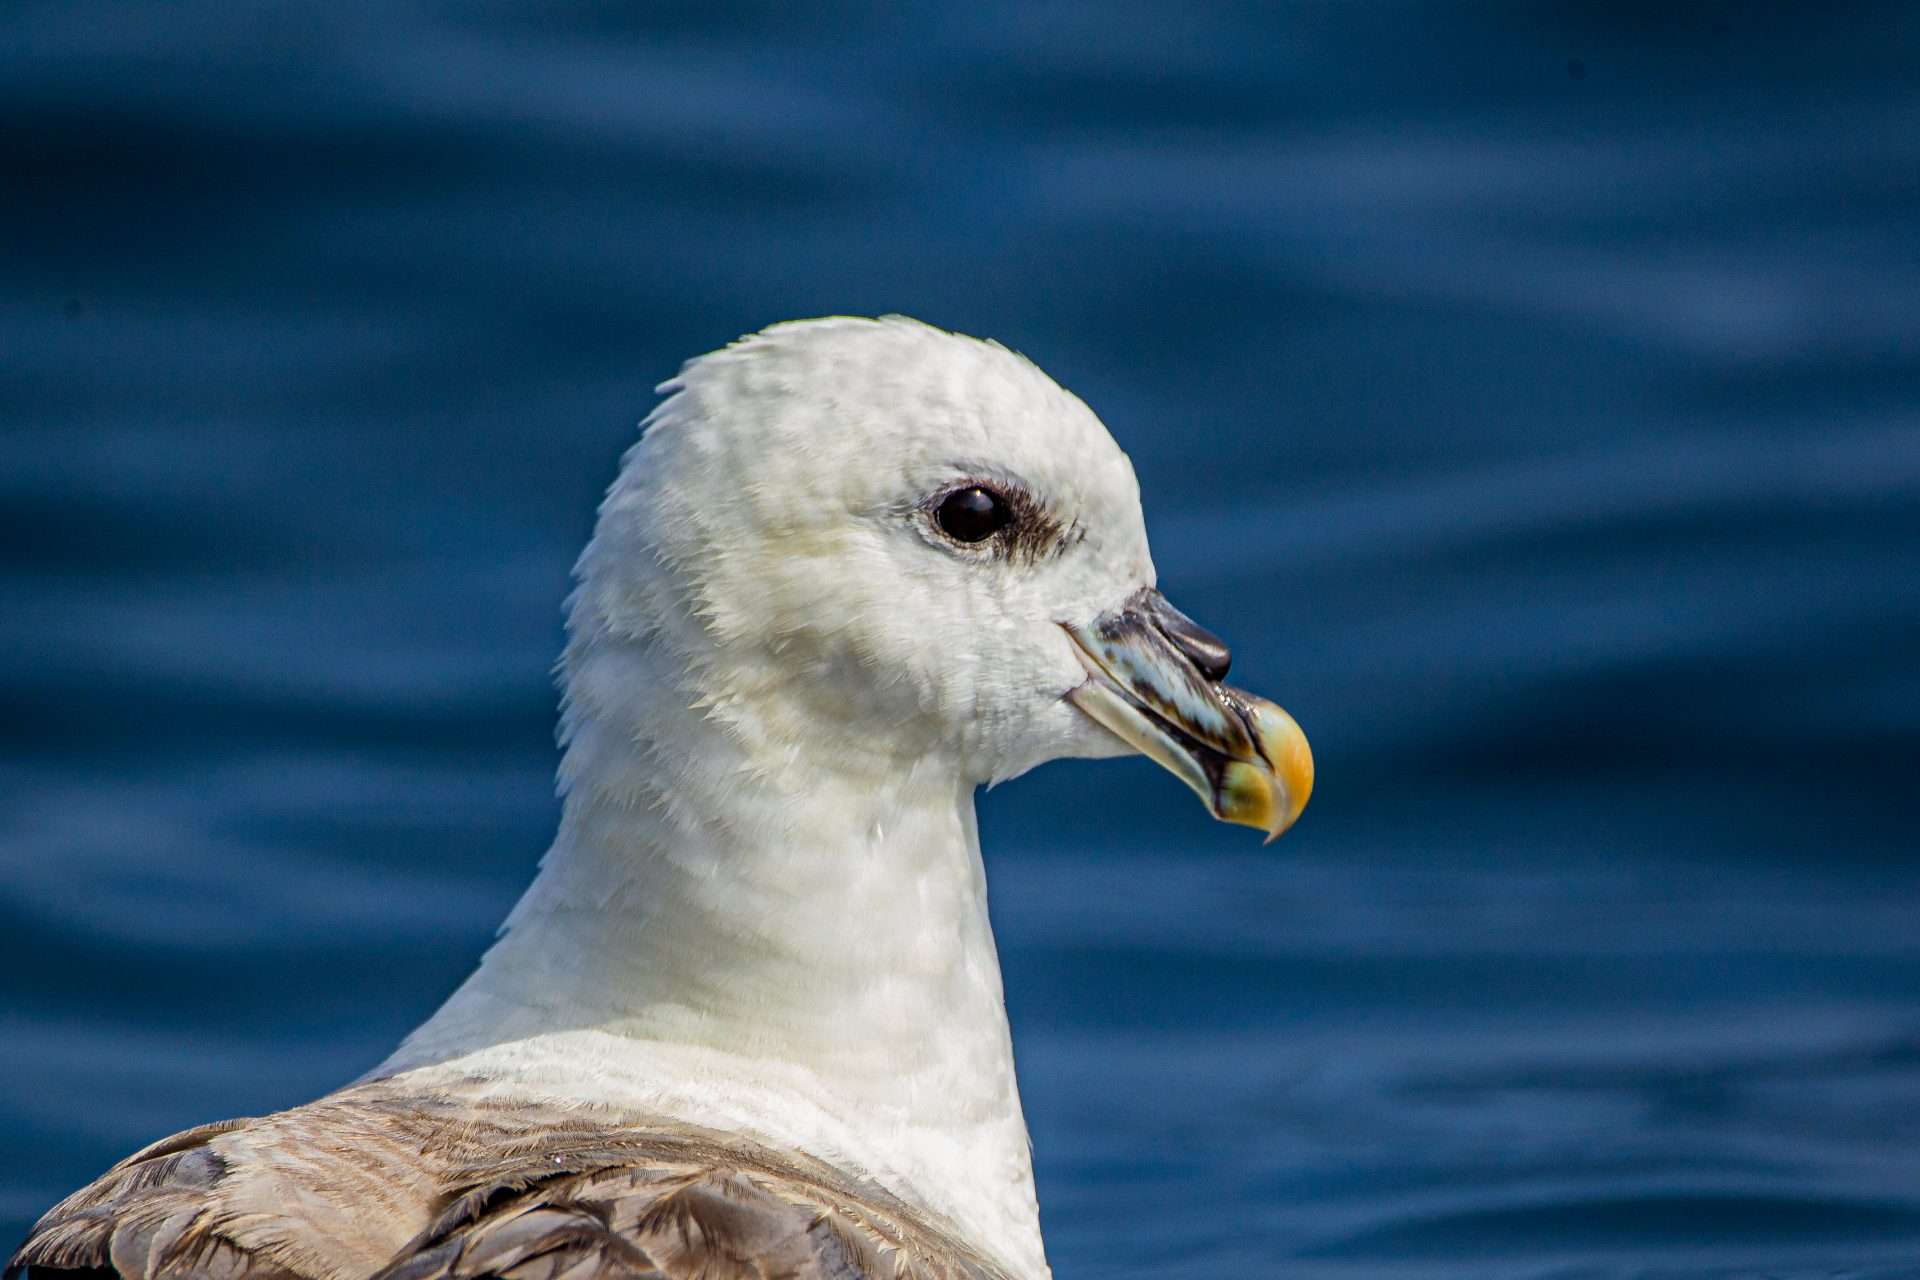 Fulmar by Phil Hampson at Lyme BAy boat trip